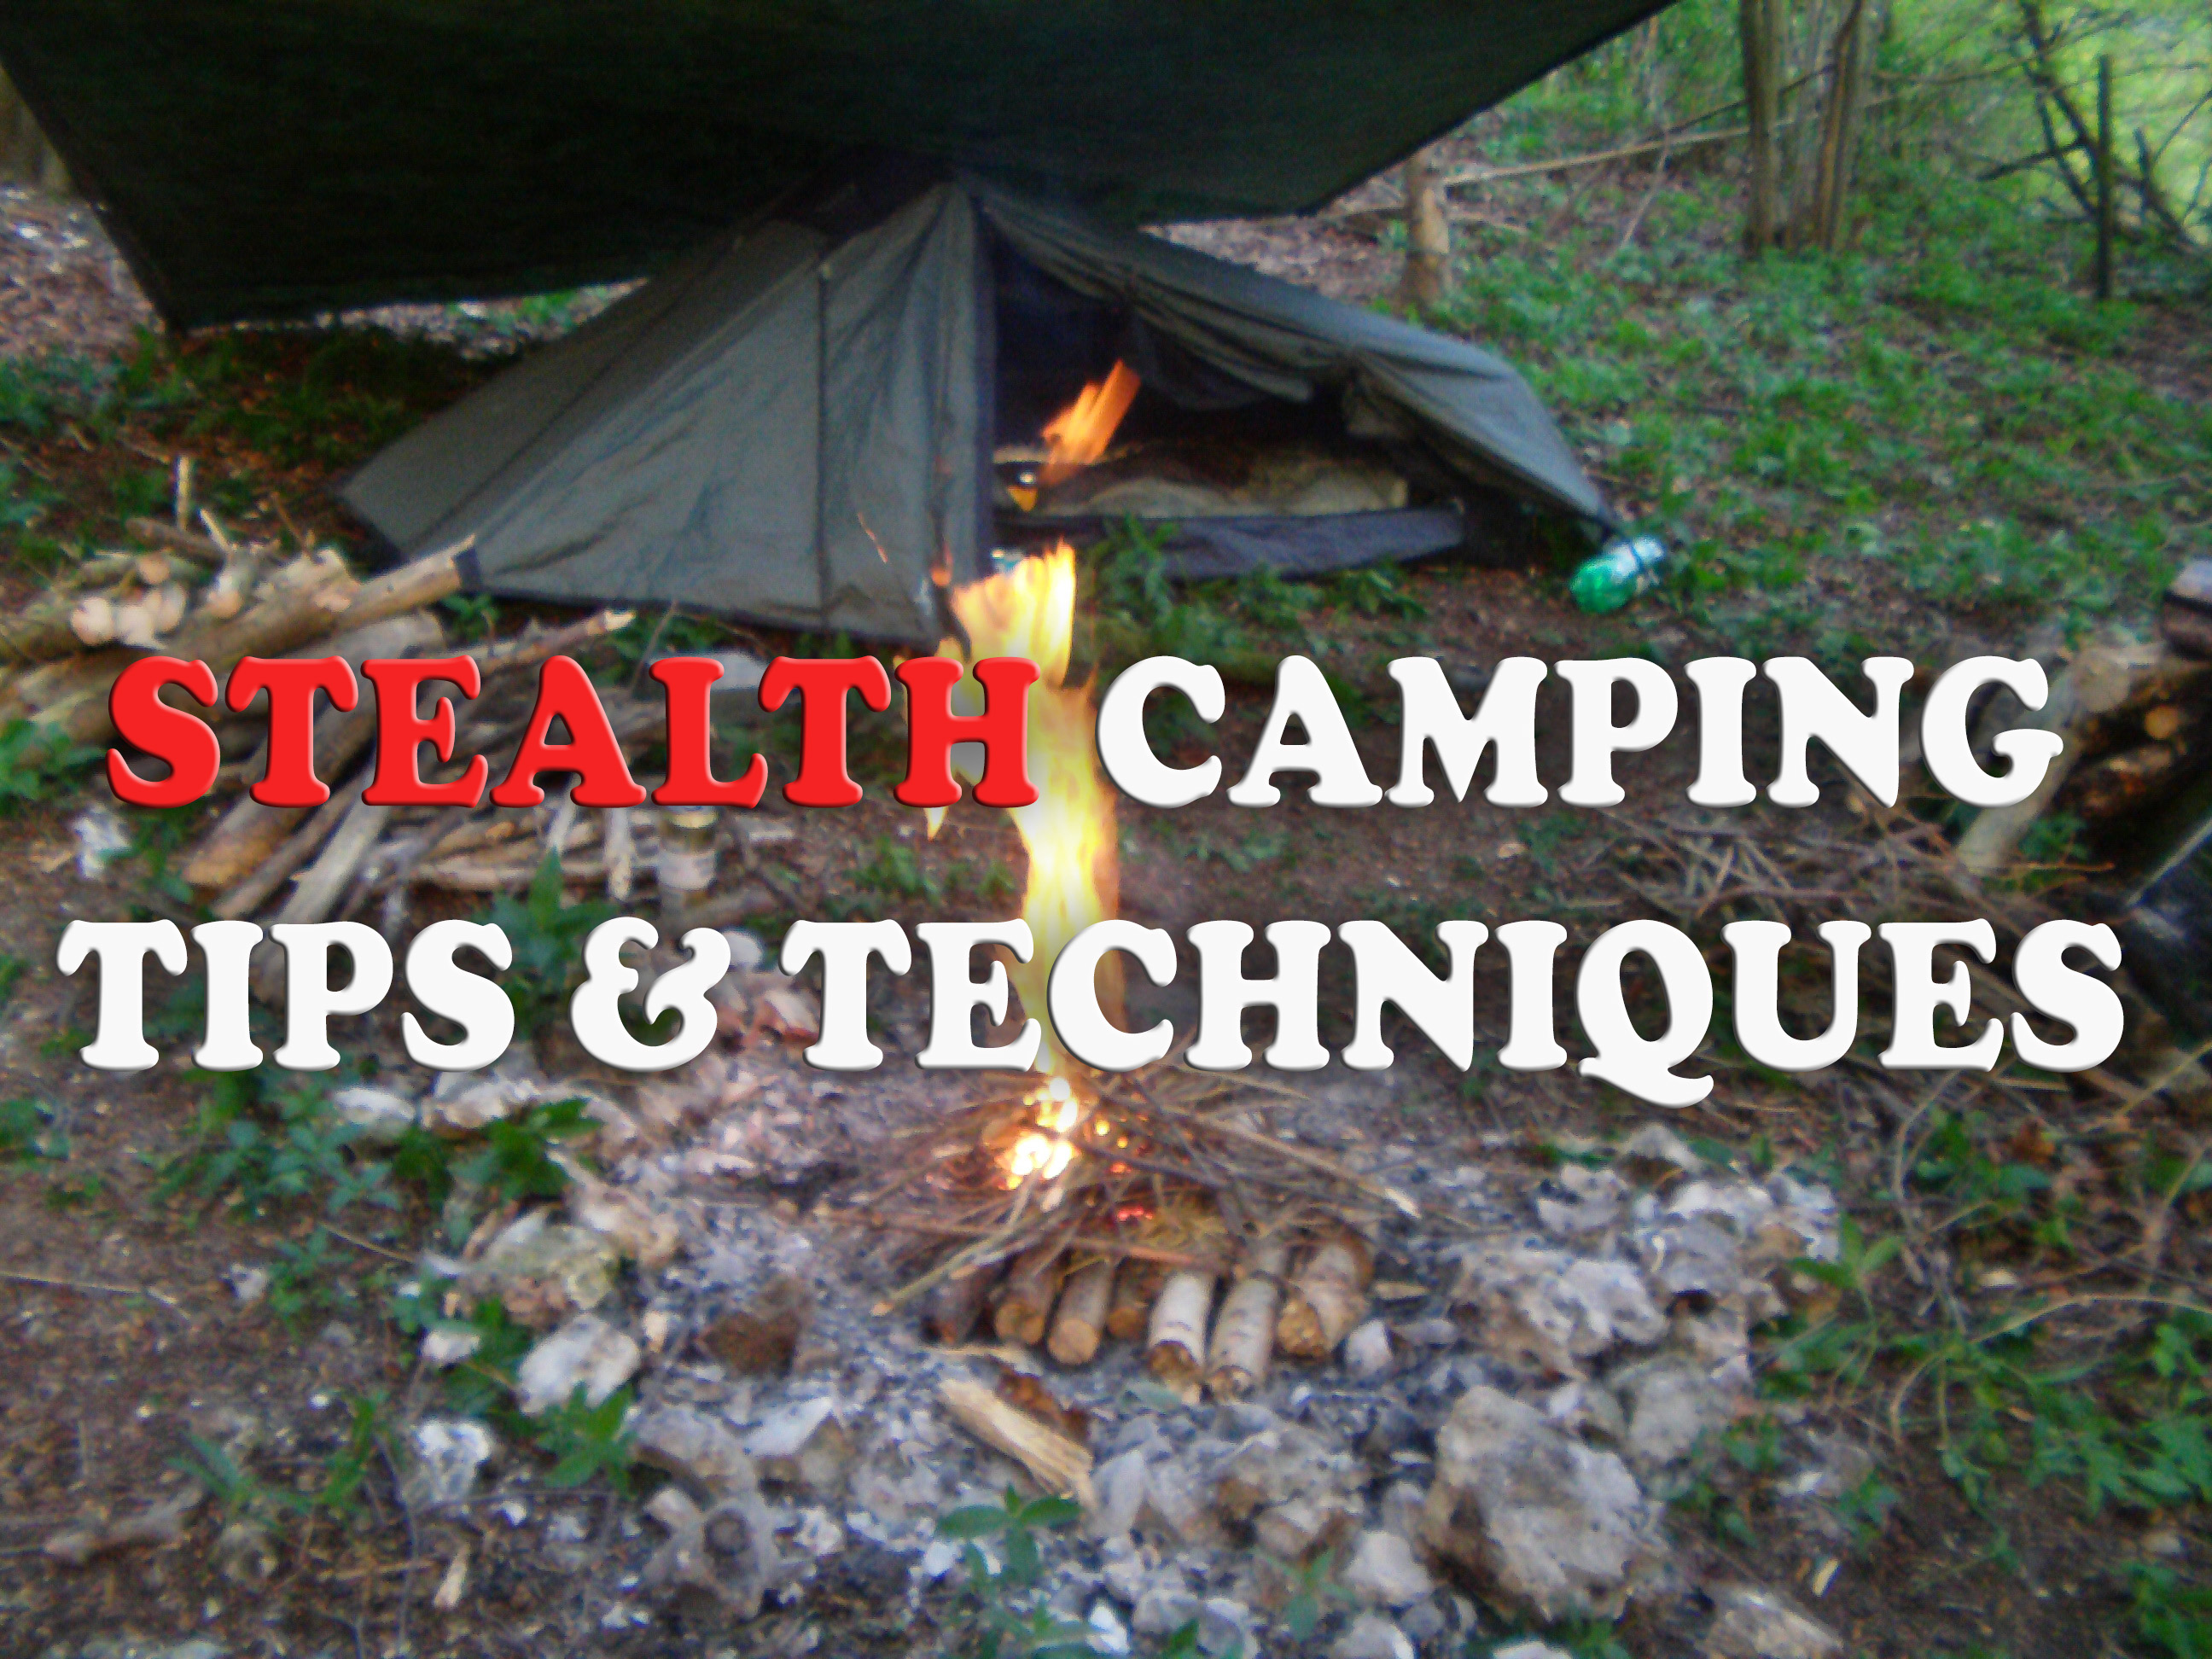 Stealth camping tips and techniques